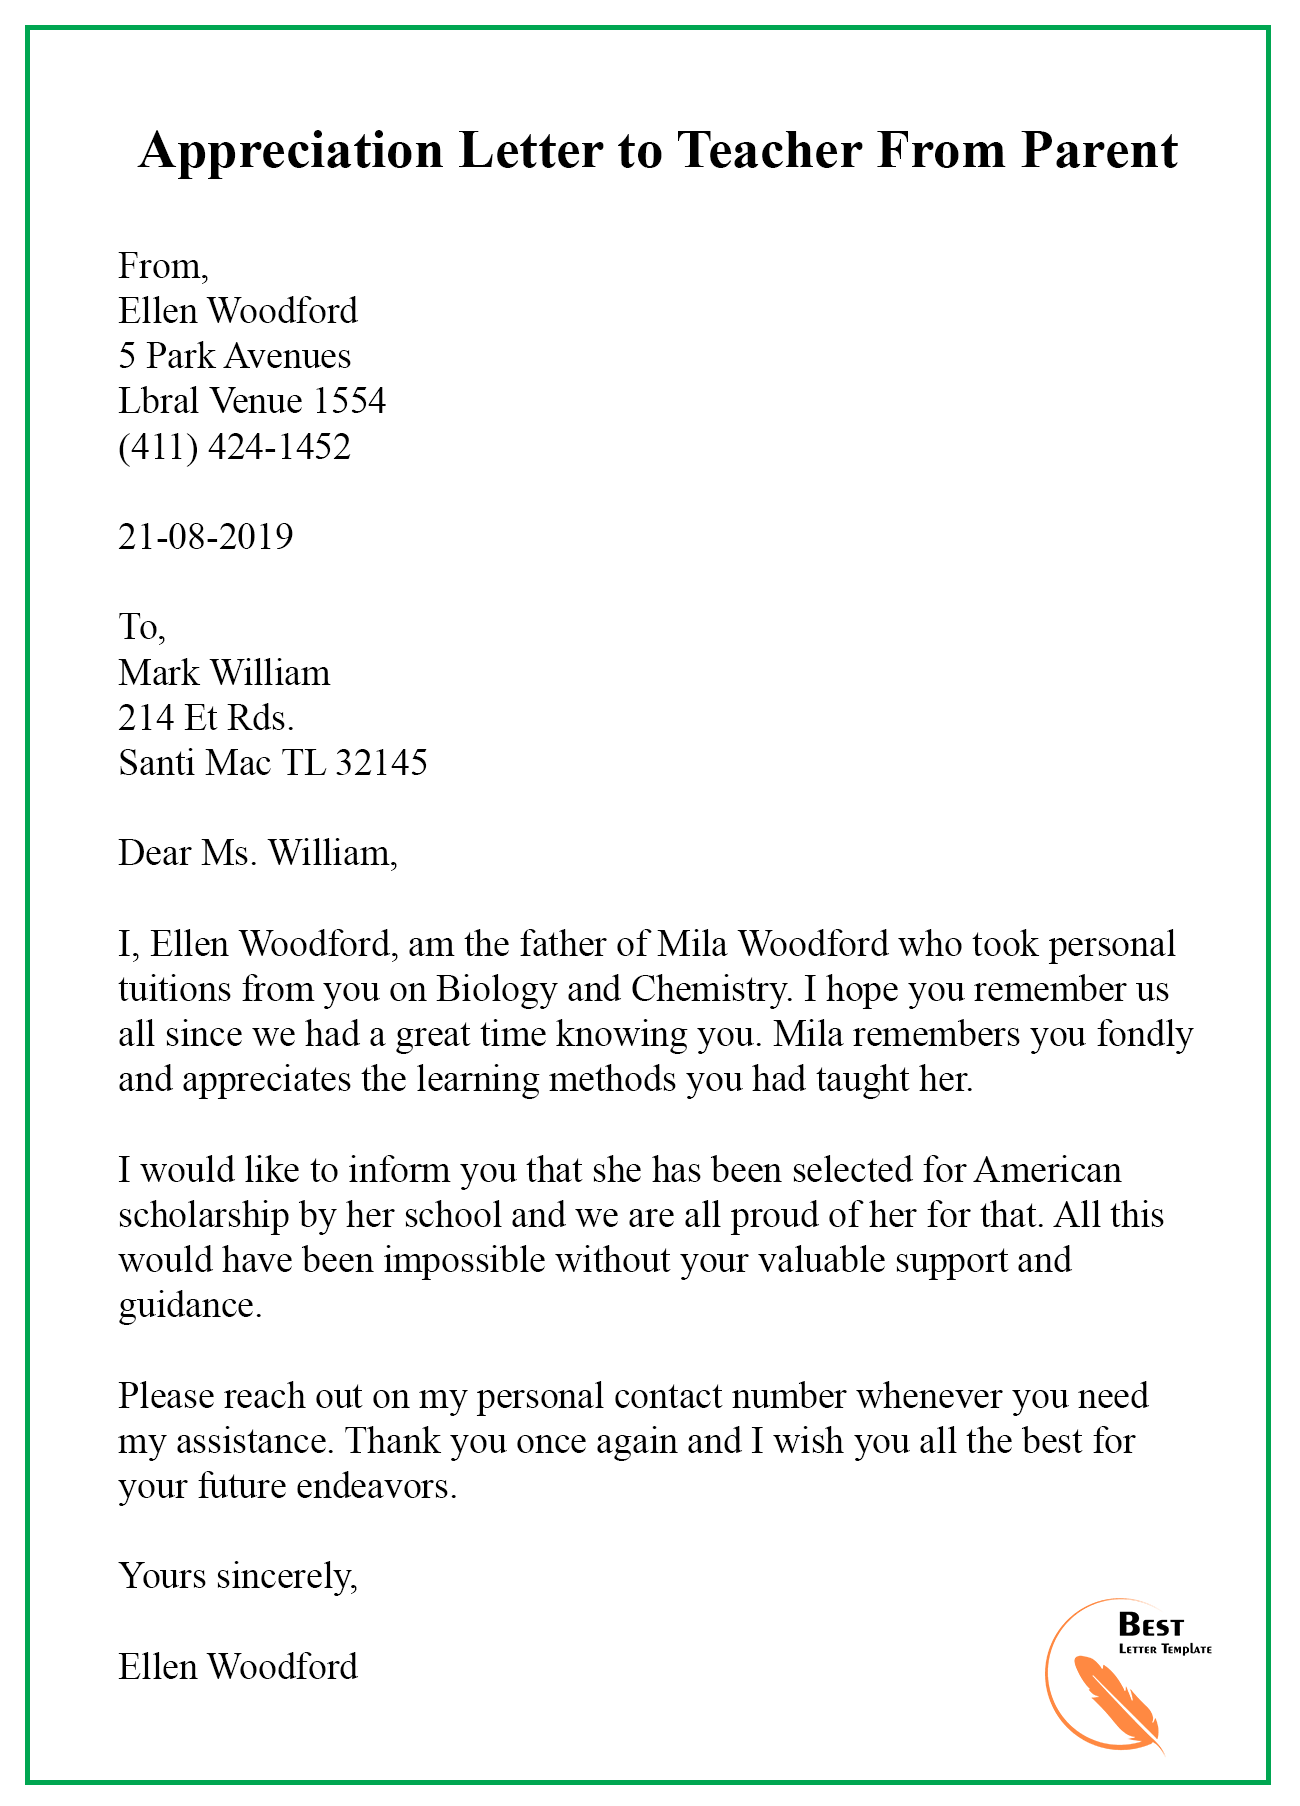 appreciation-letter-to-the-teacher-format-sample-example